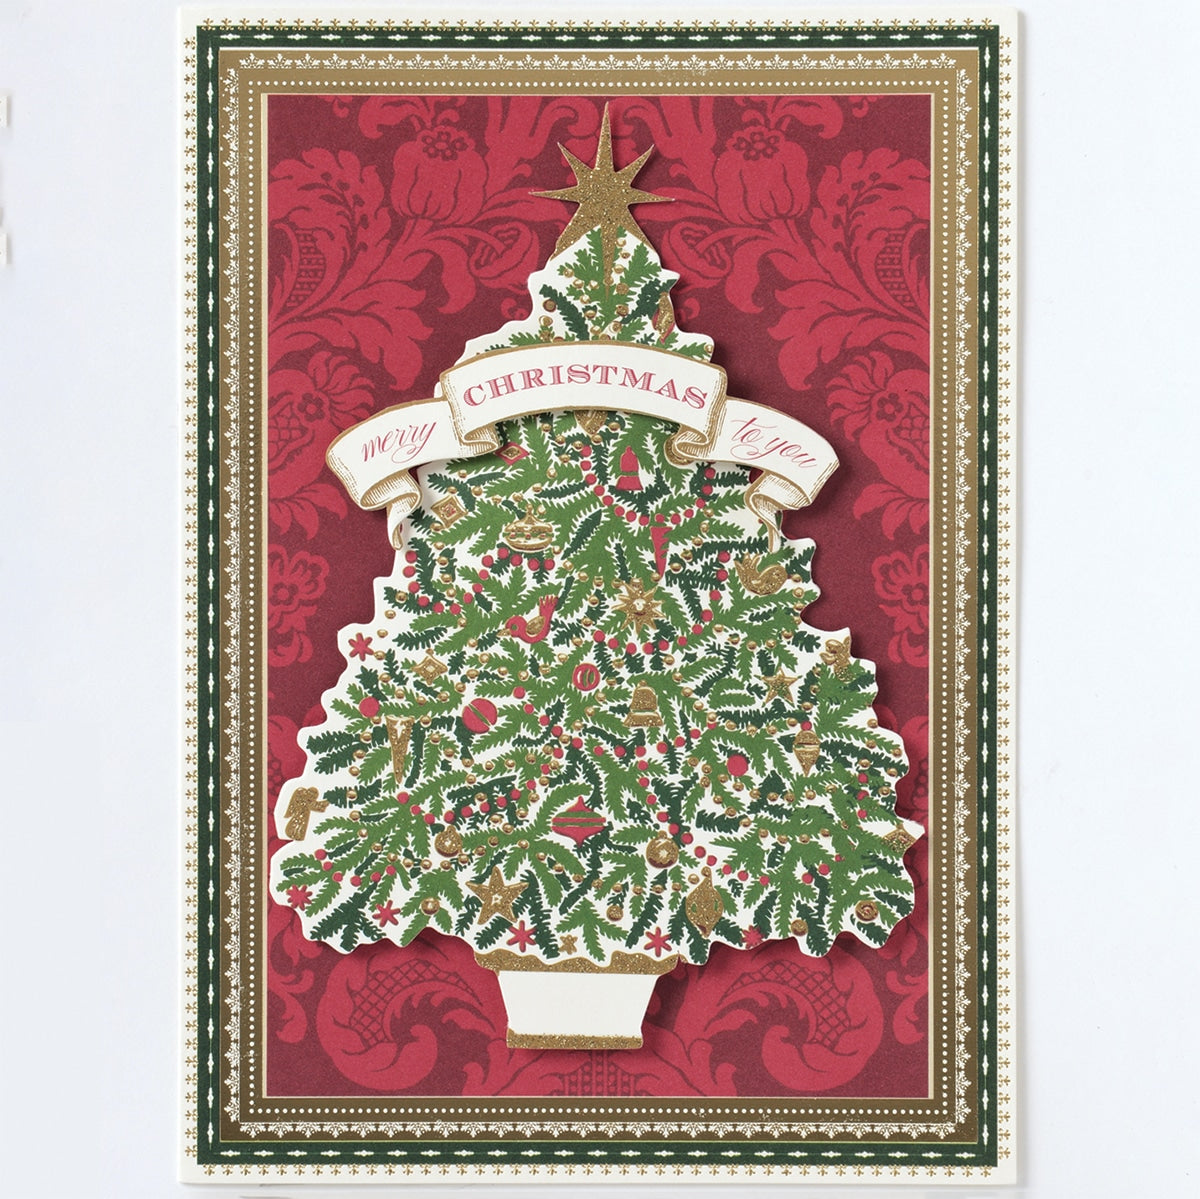 A Yuletide Tree Boxed Card with a Christmas tree on it.